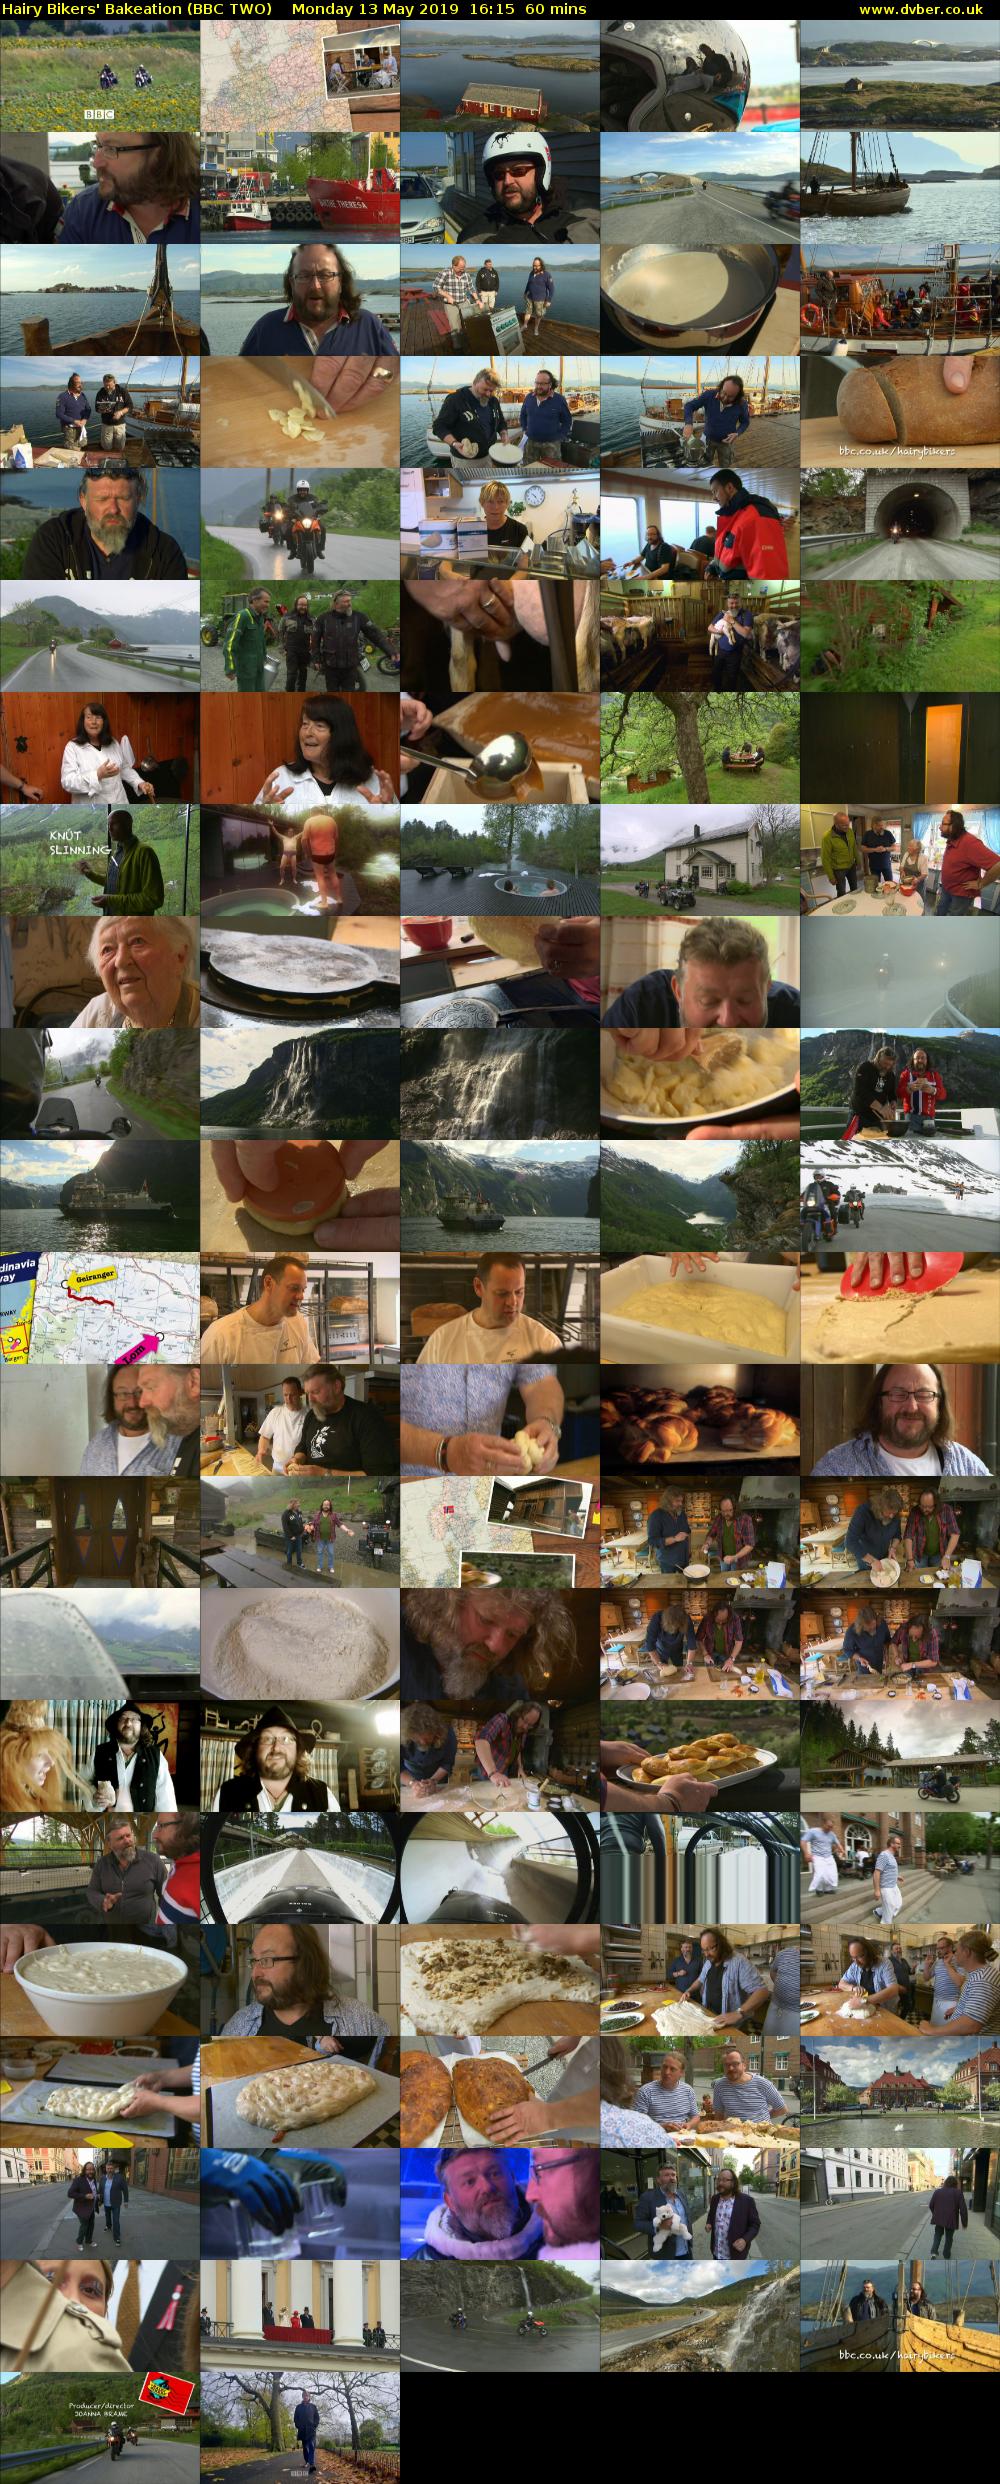 Hairy Bikers' Bakeation (BBC TWO) Monday 13 May 2019 16:15 - 17:15